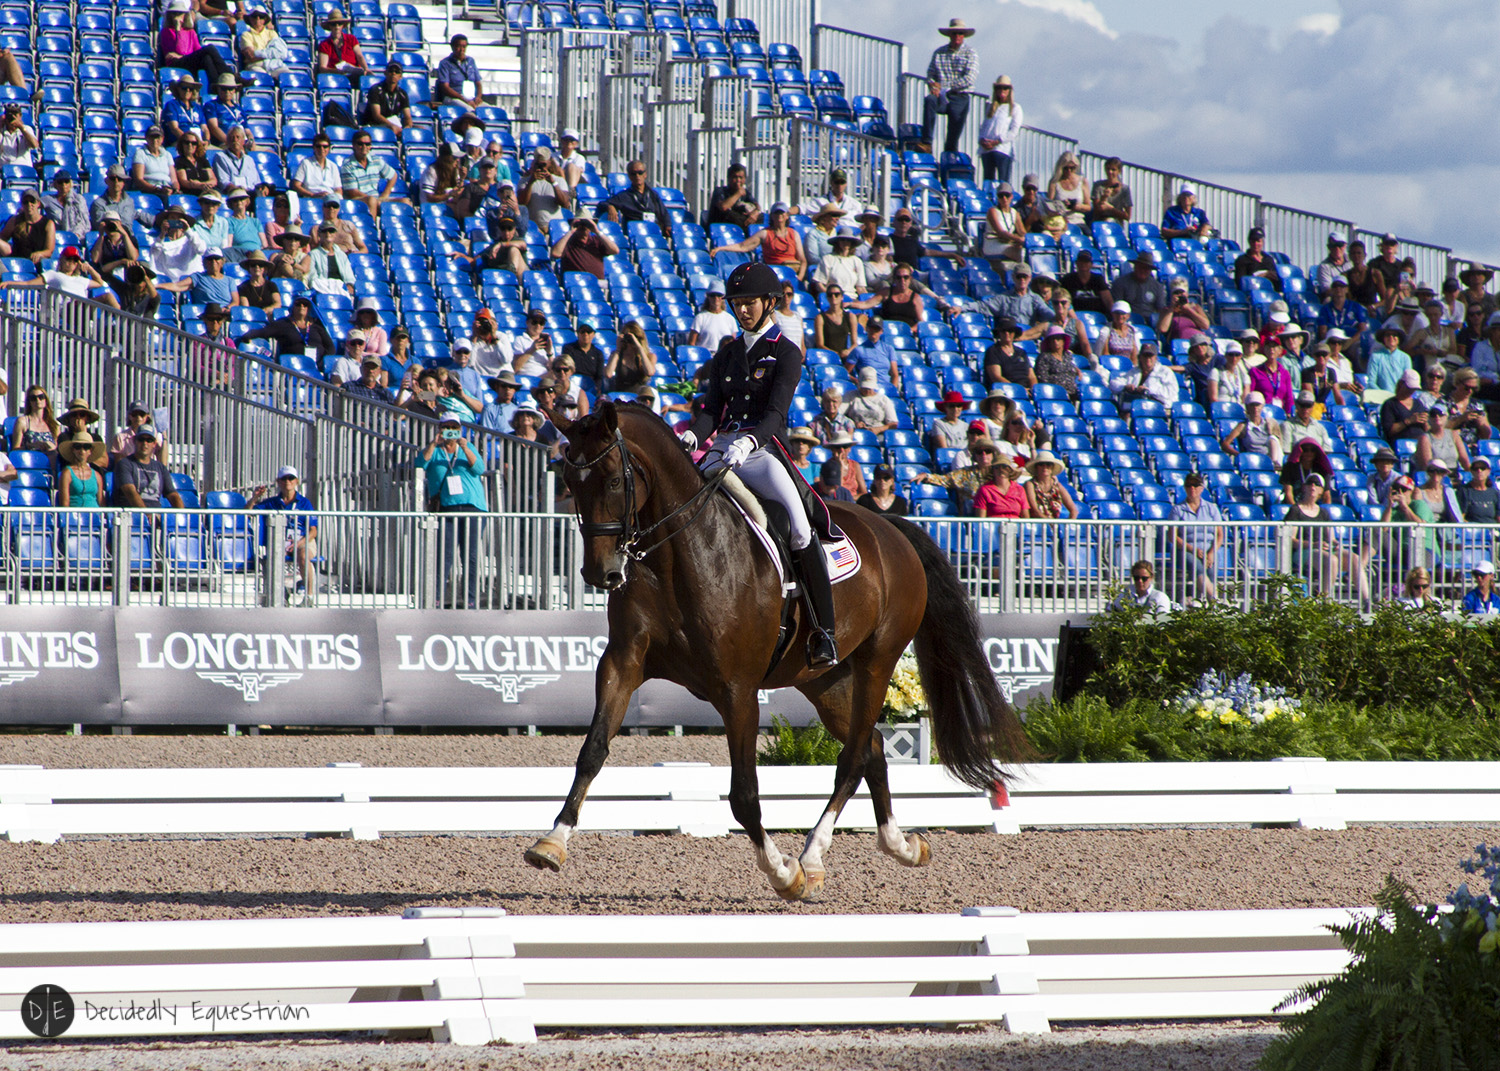 World Equestrian Games Tryon 2018 Dressage Team Competition